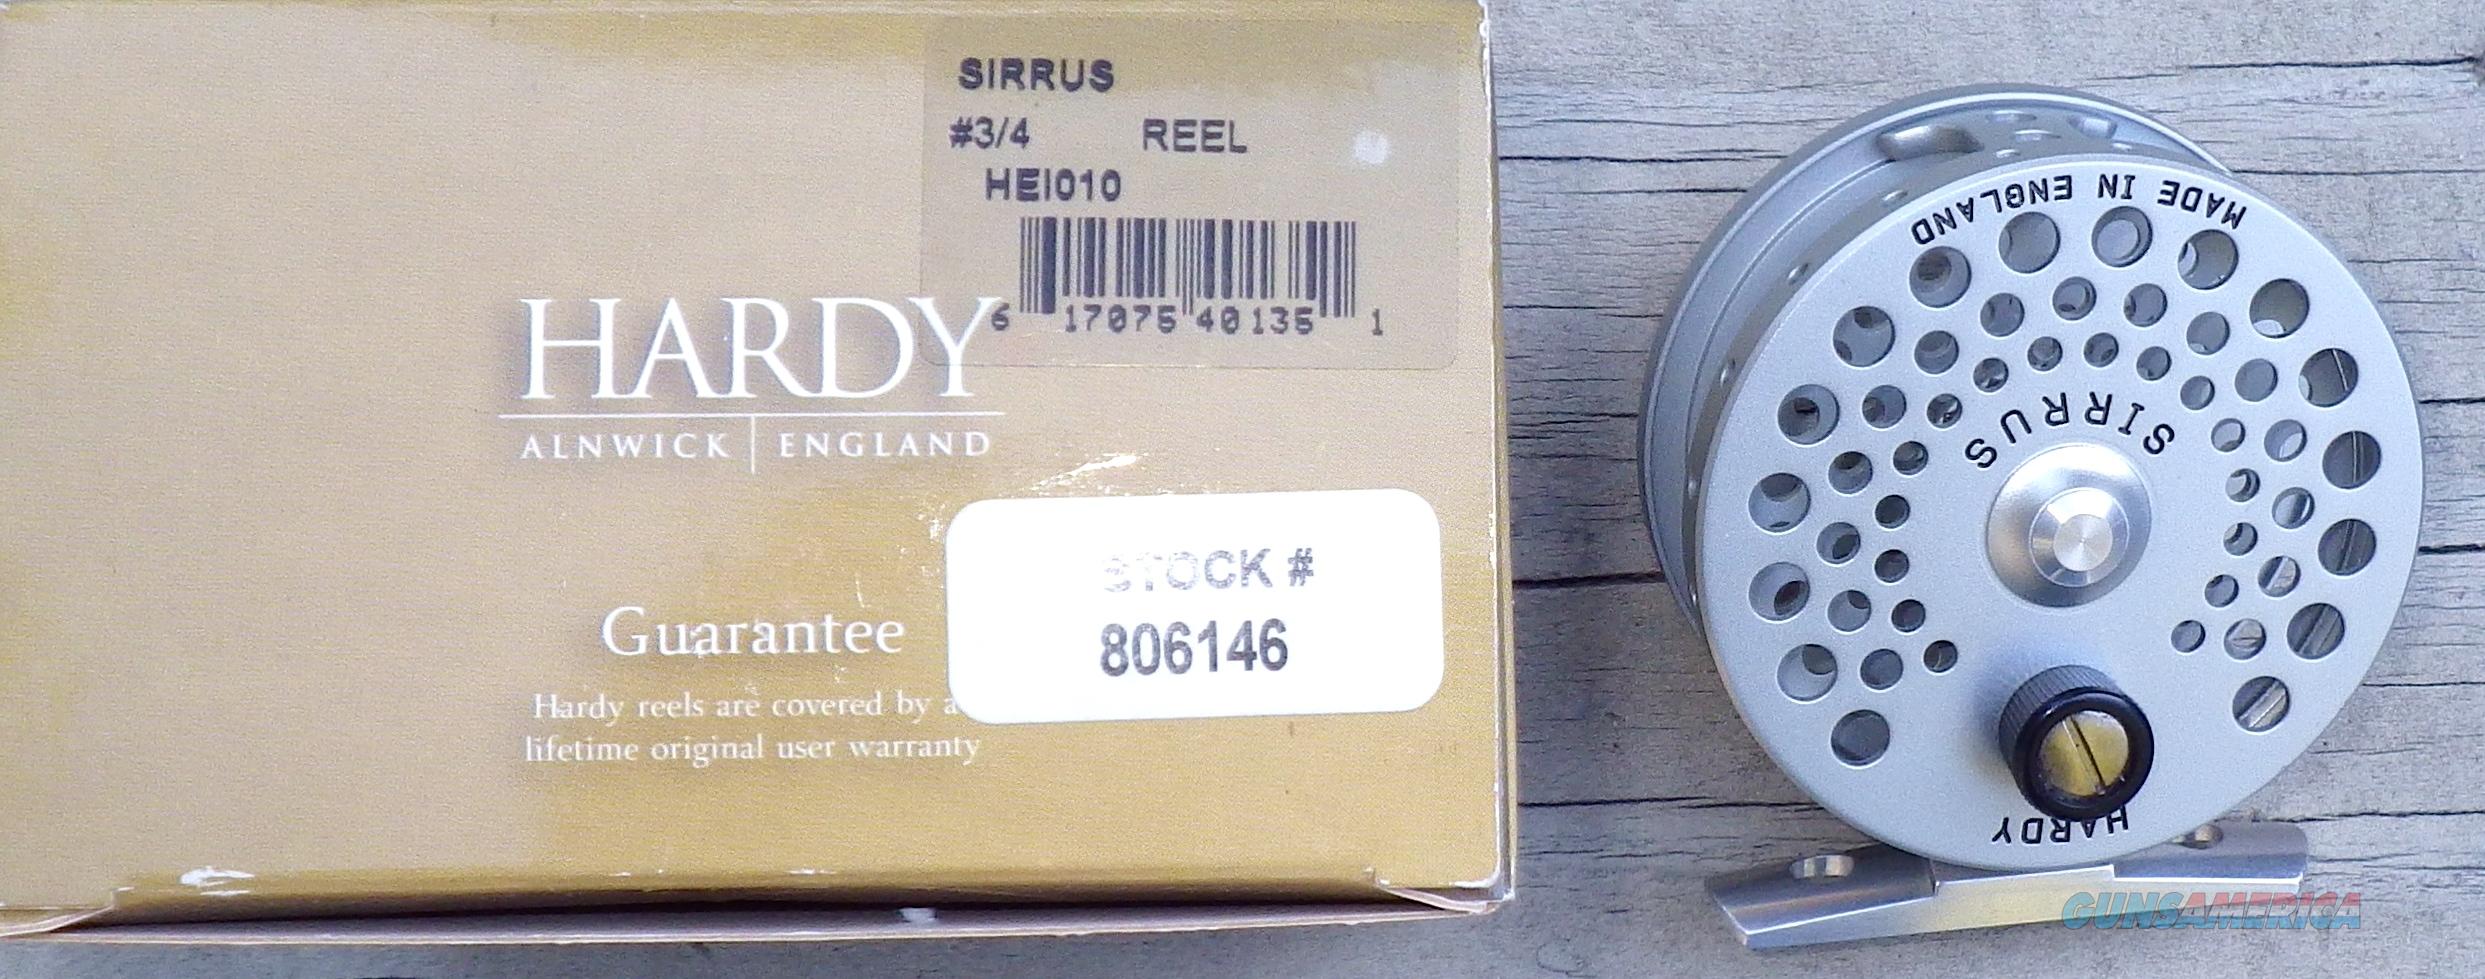 Hardy Sirrus 3/4 fly reel, NIB, mad for sale at